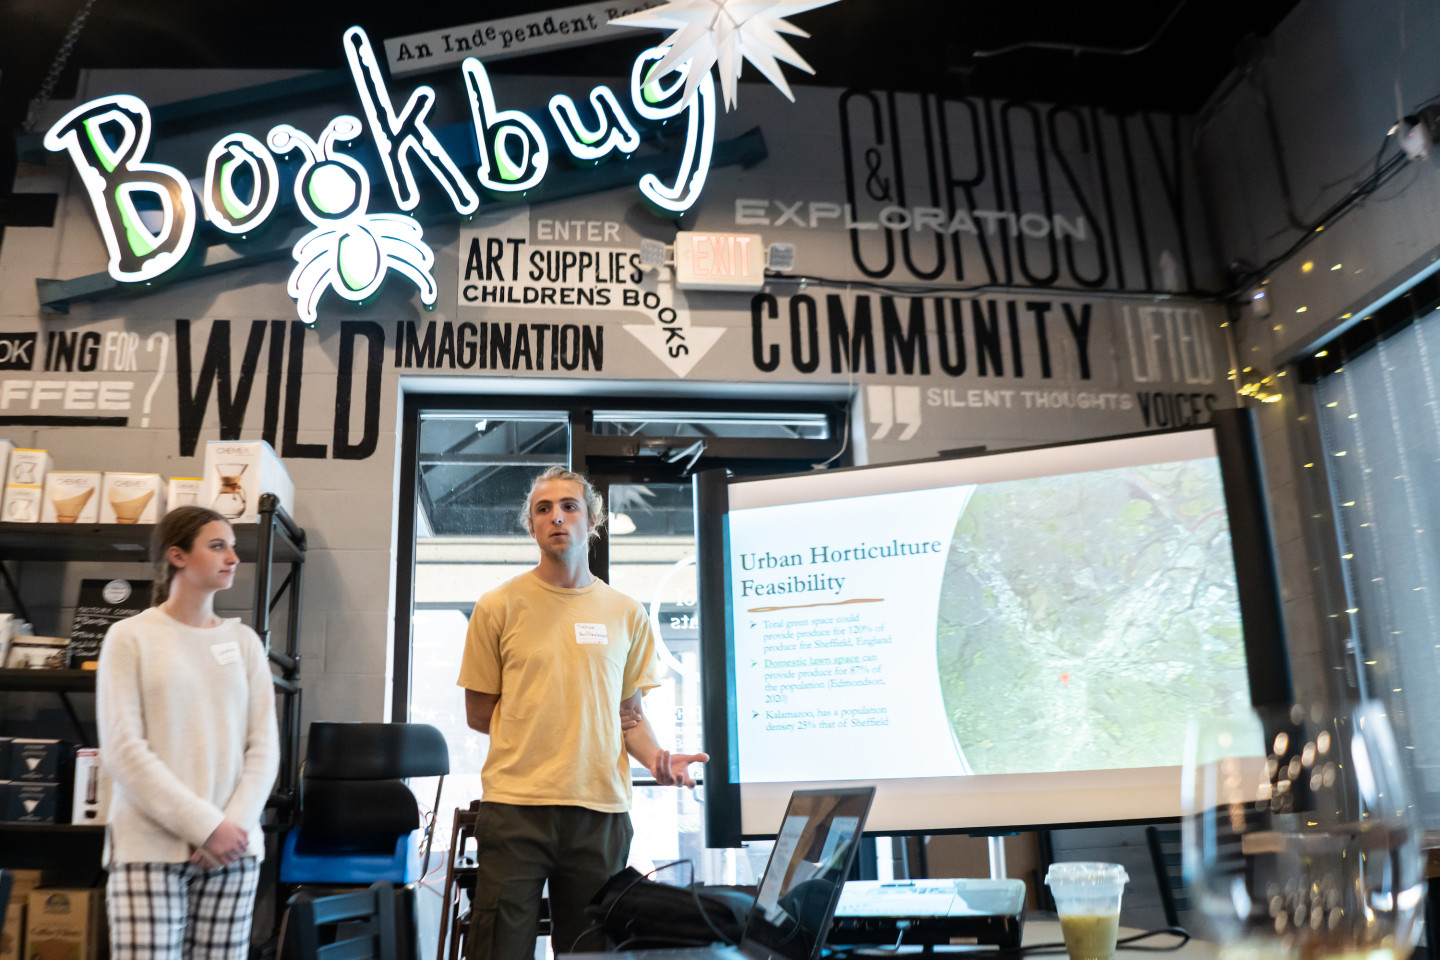 Joshua VanSlambrouck presents his team's concept in a coffee shop under a sign that reads "Bookbug."